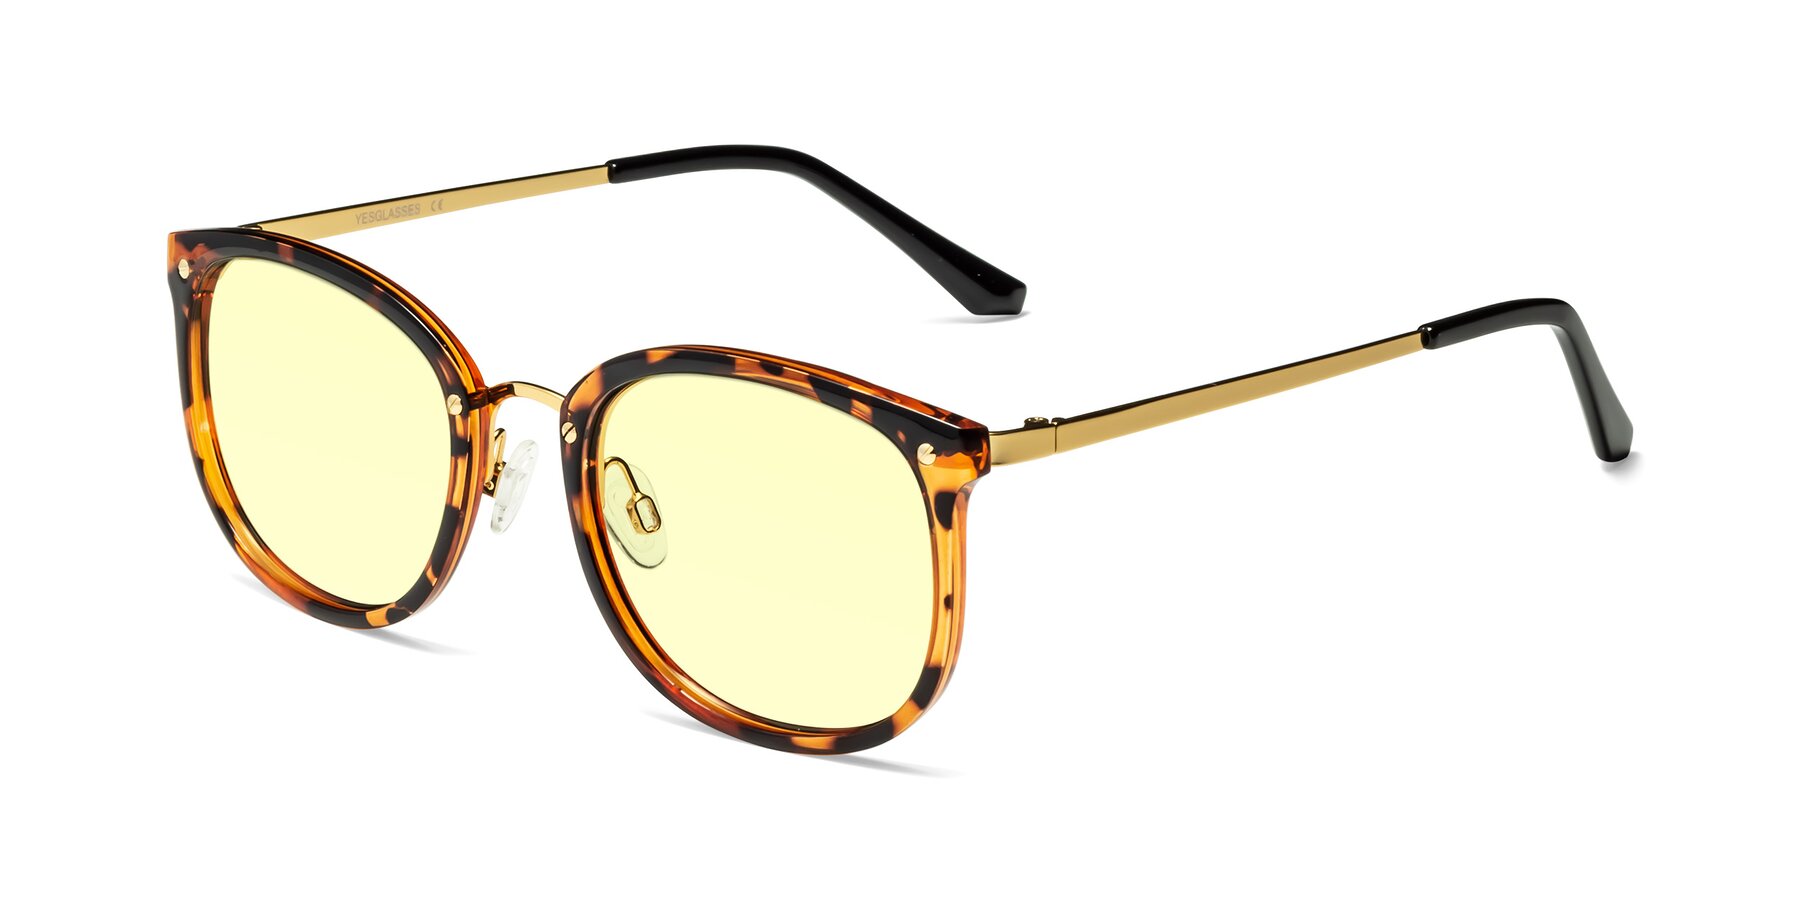 Angle of Timeless in Tortoise-Golden with Light Yellow Tinted Lenses